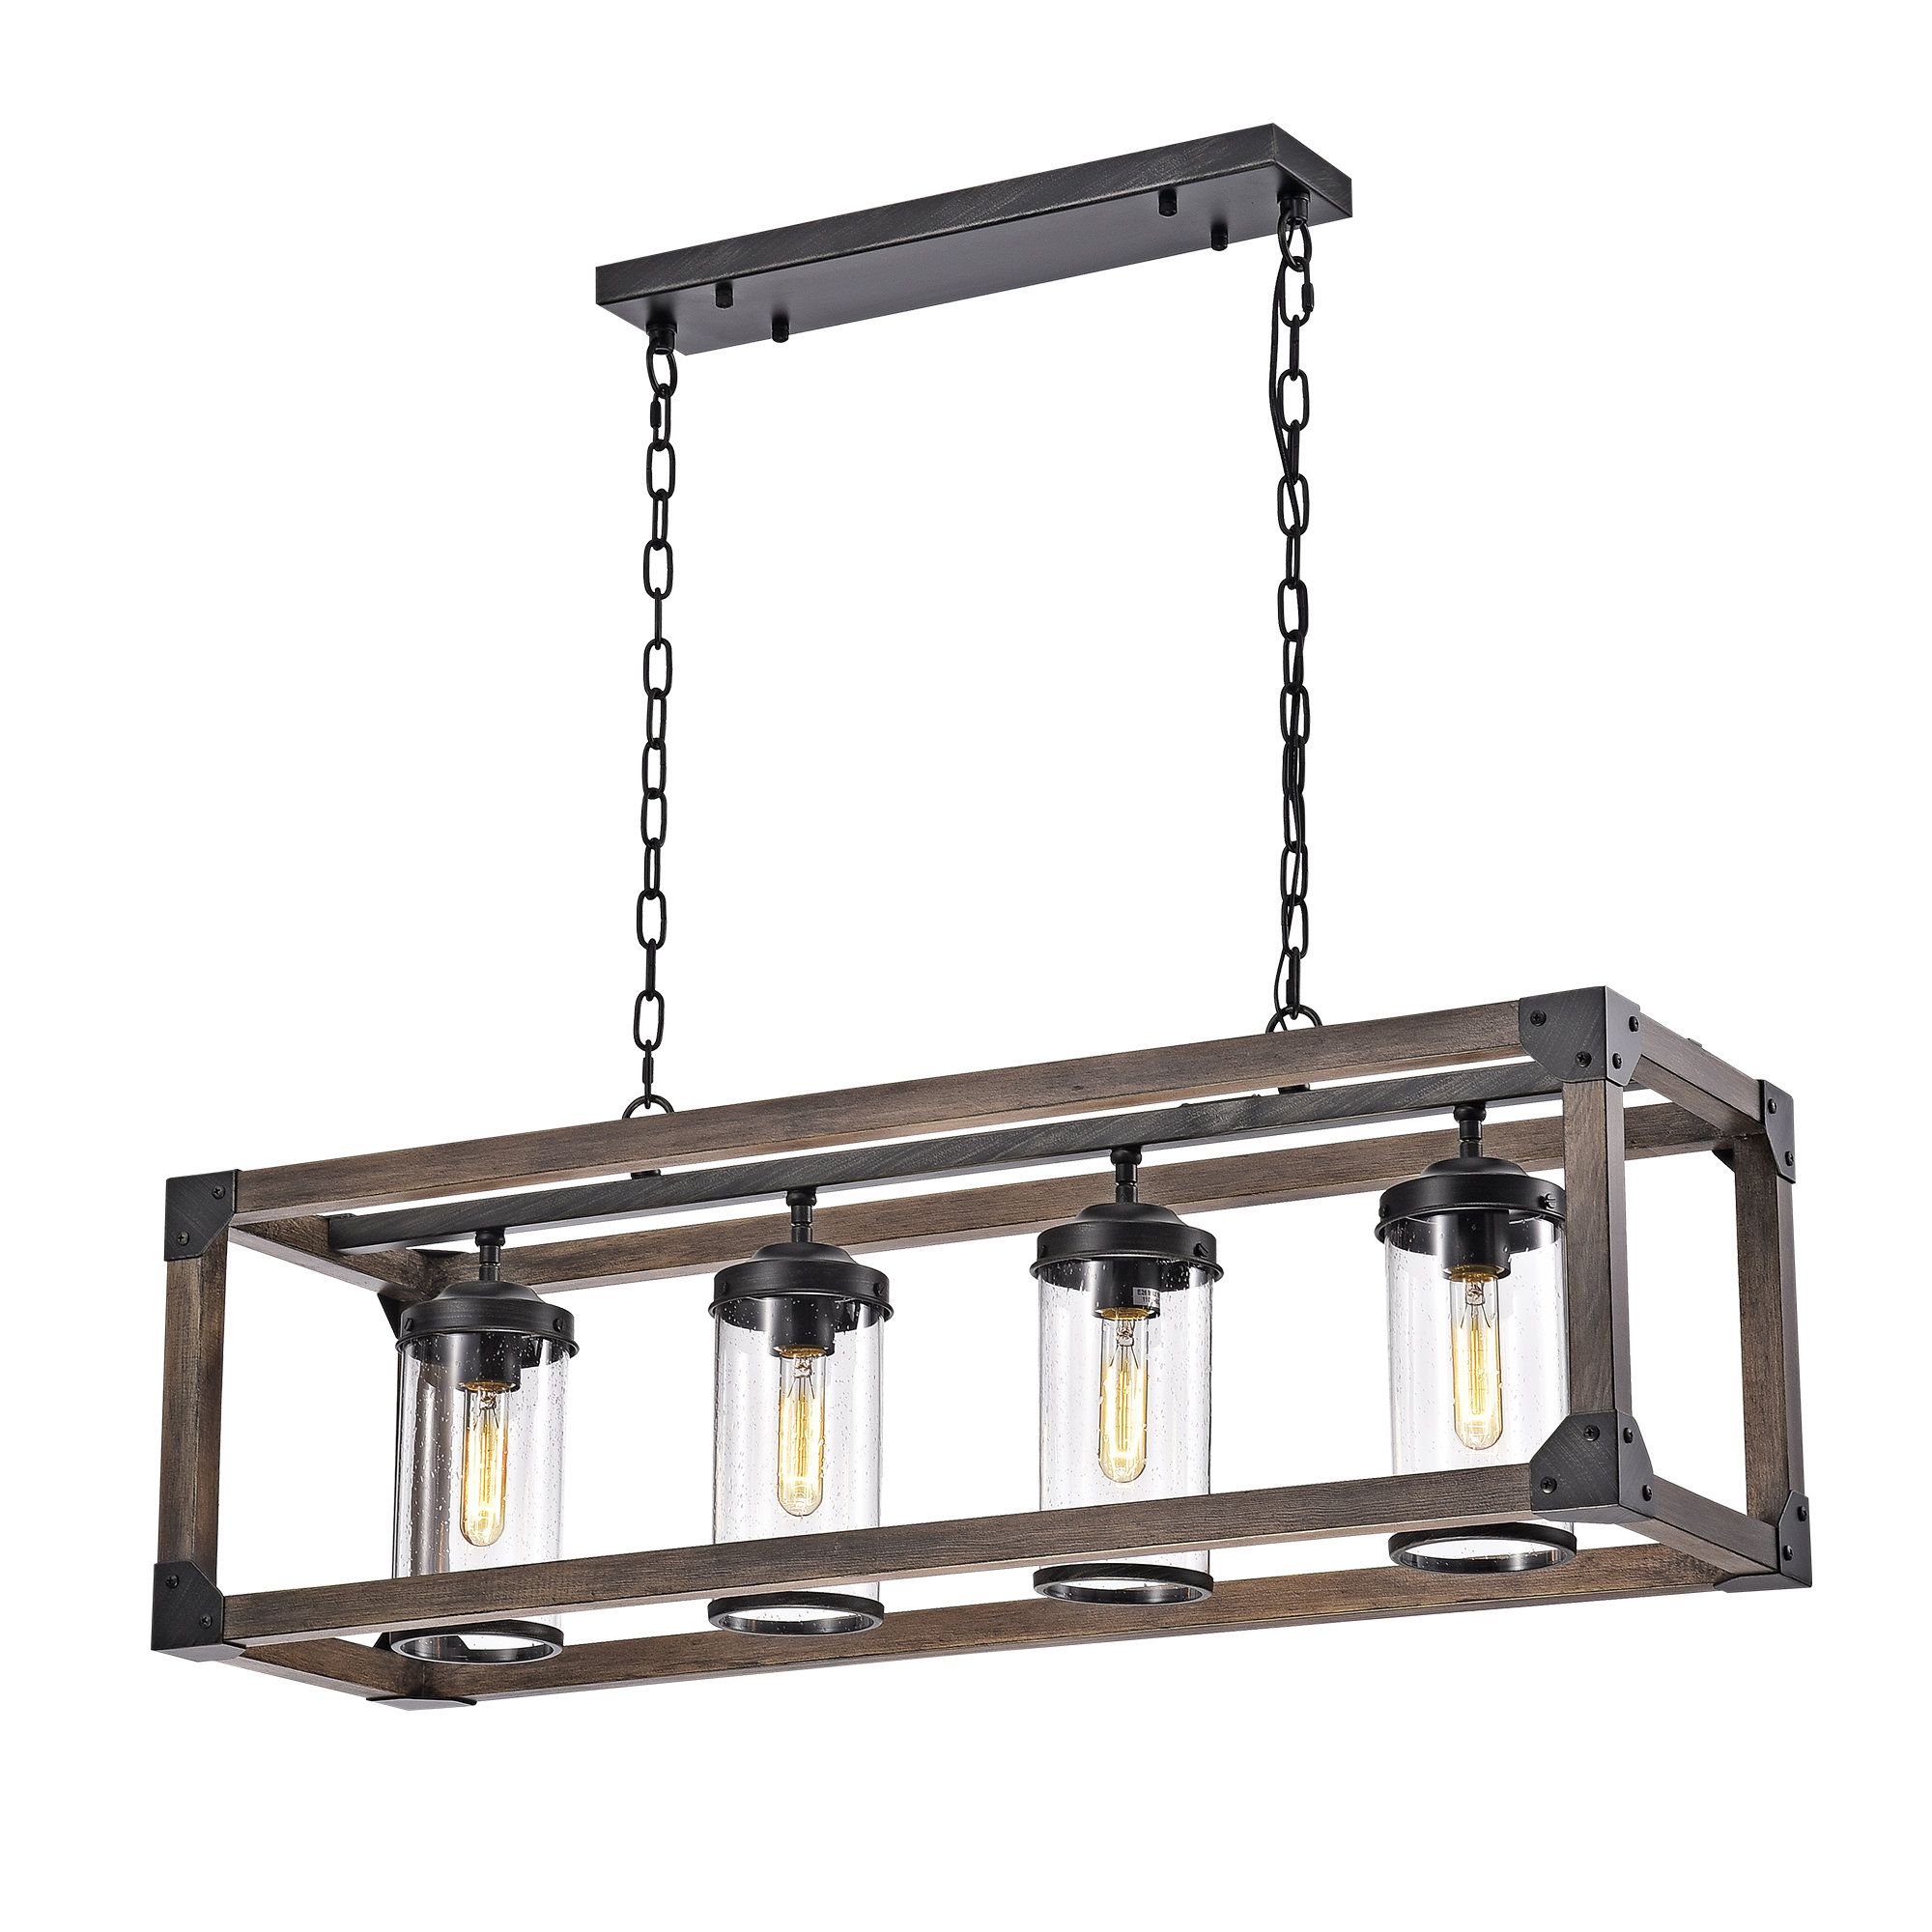 Black Square & Rectangular Chandeliers You'll Love In 2019 In Hewitt 4 Light Square Chandeliers (View 11 of 30)